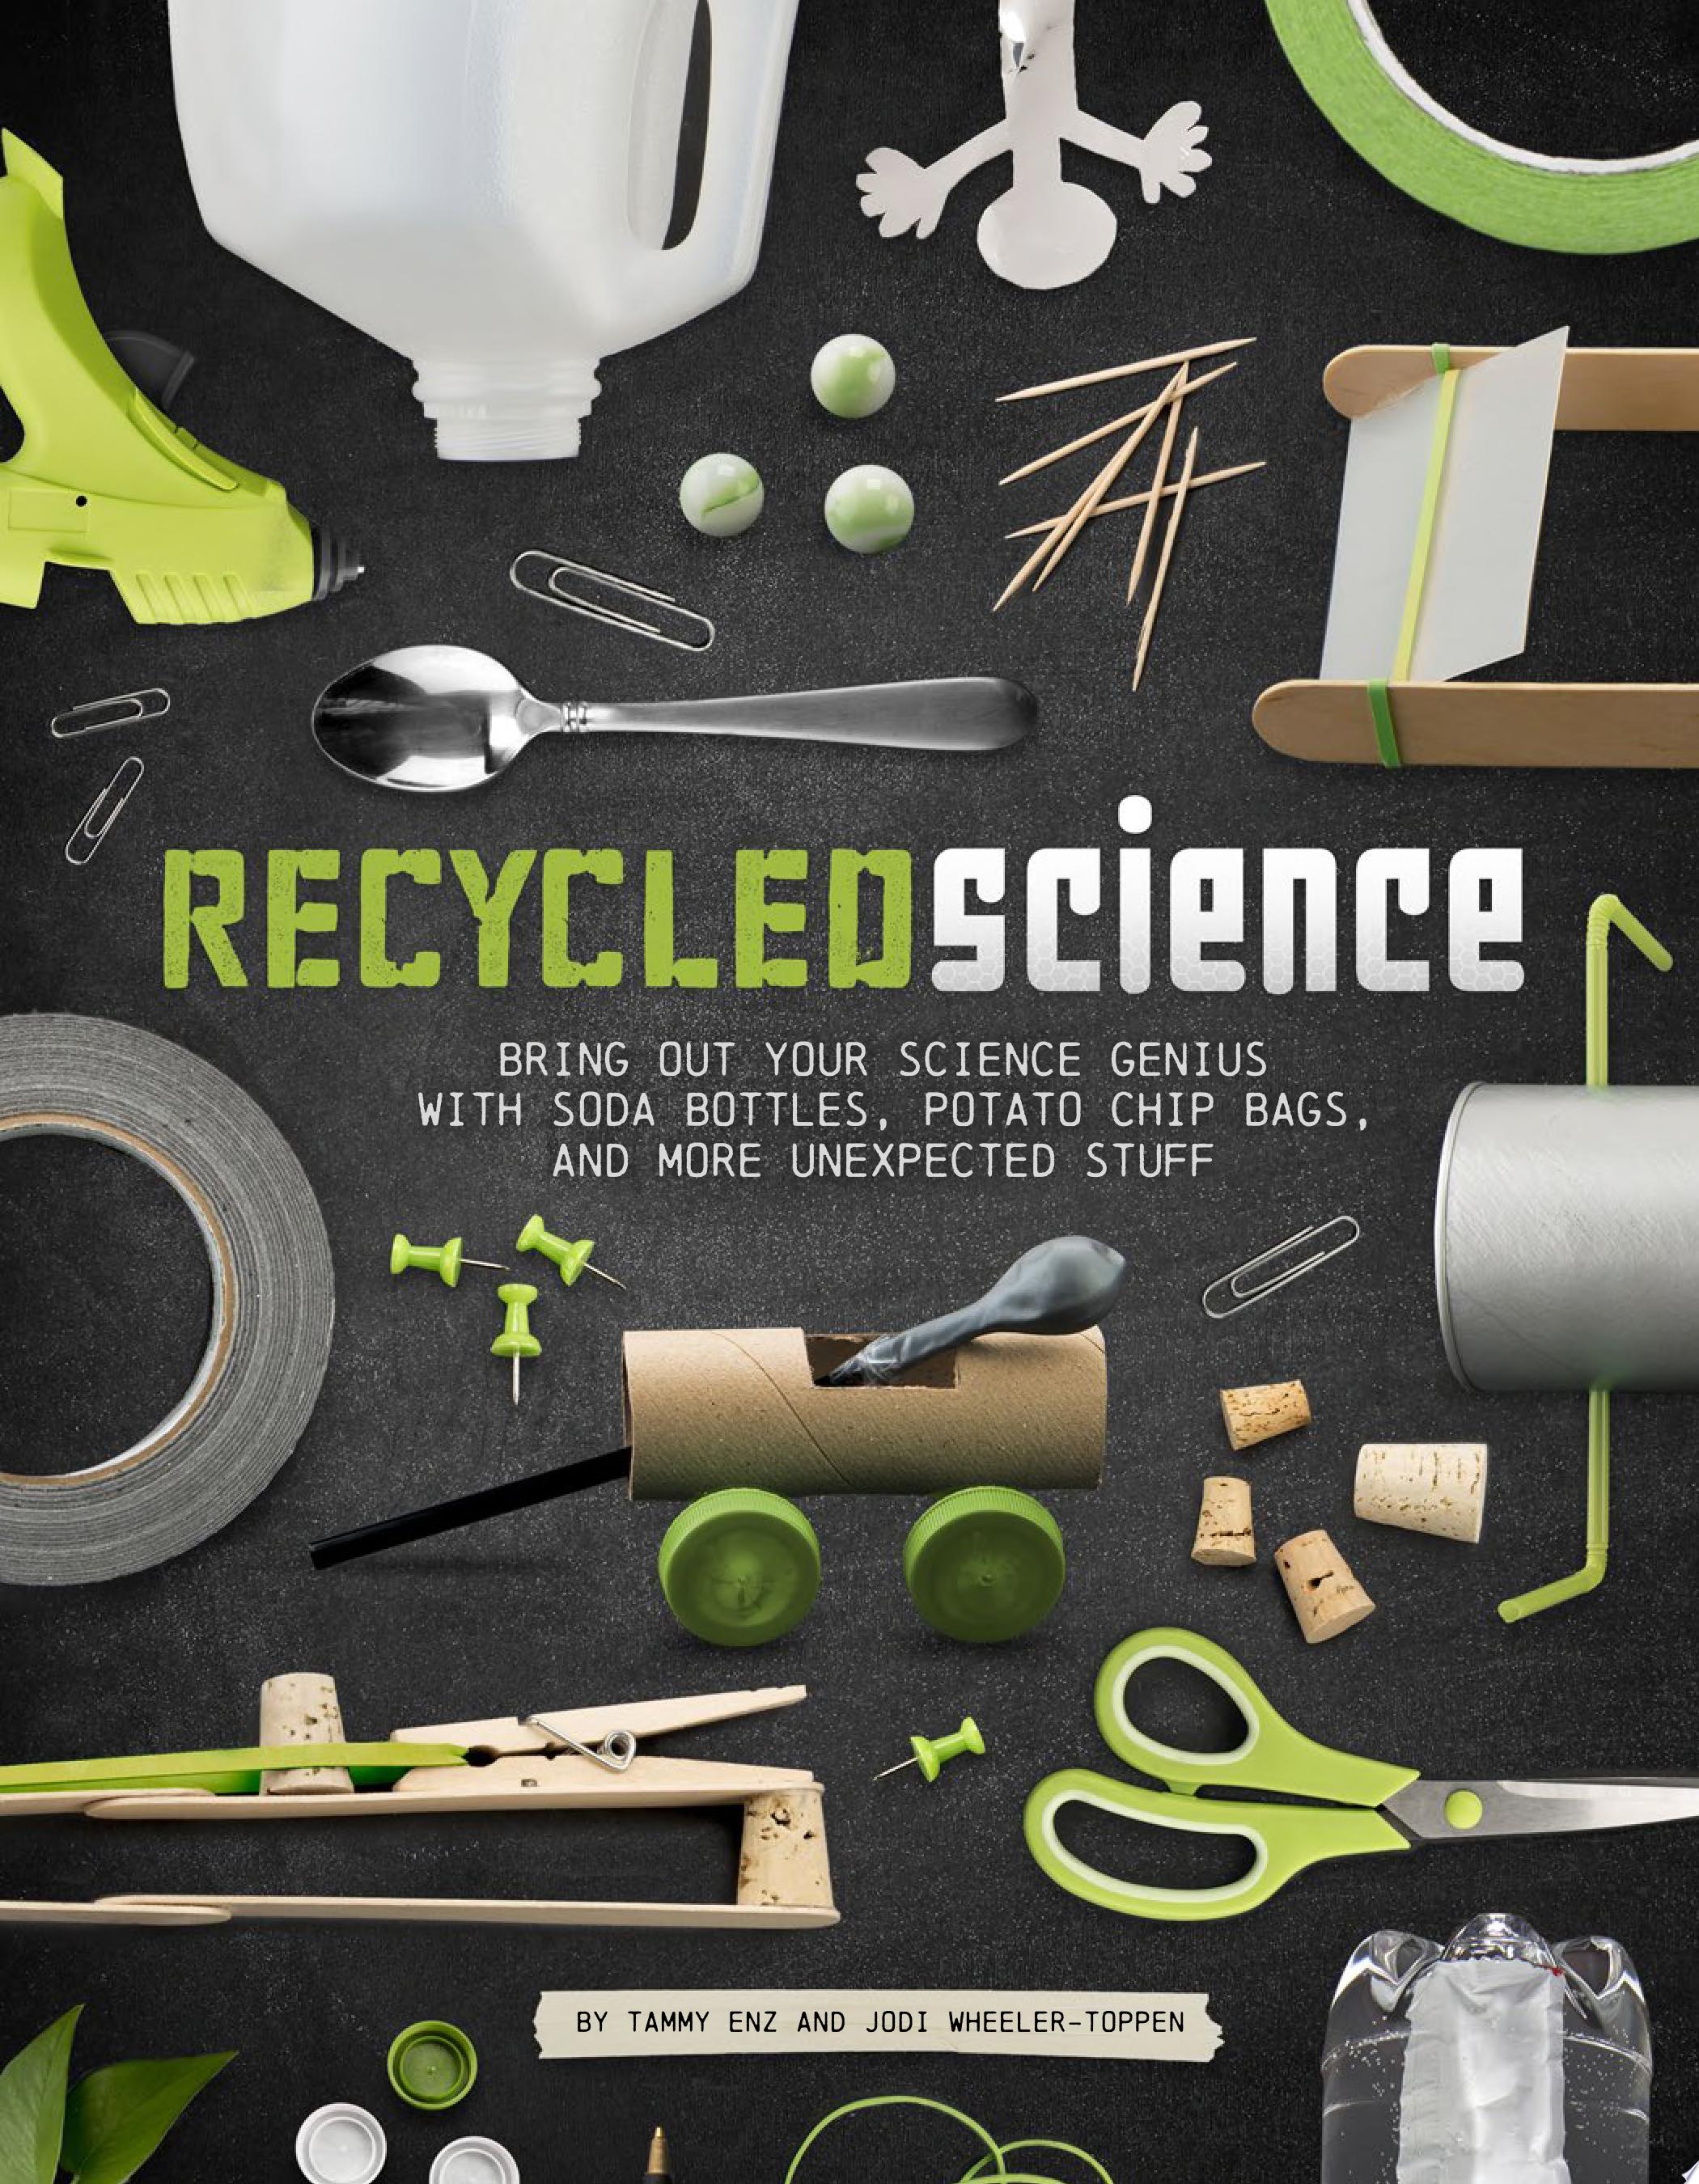 Image for "Recycled Science"